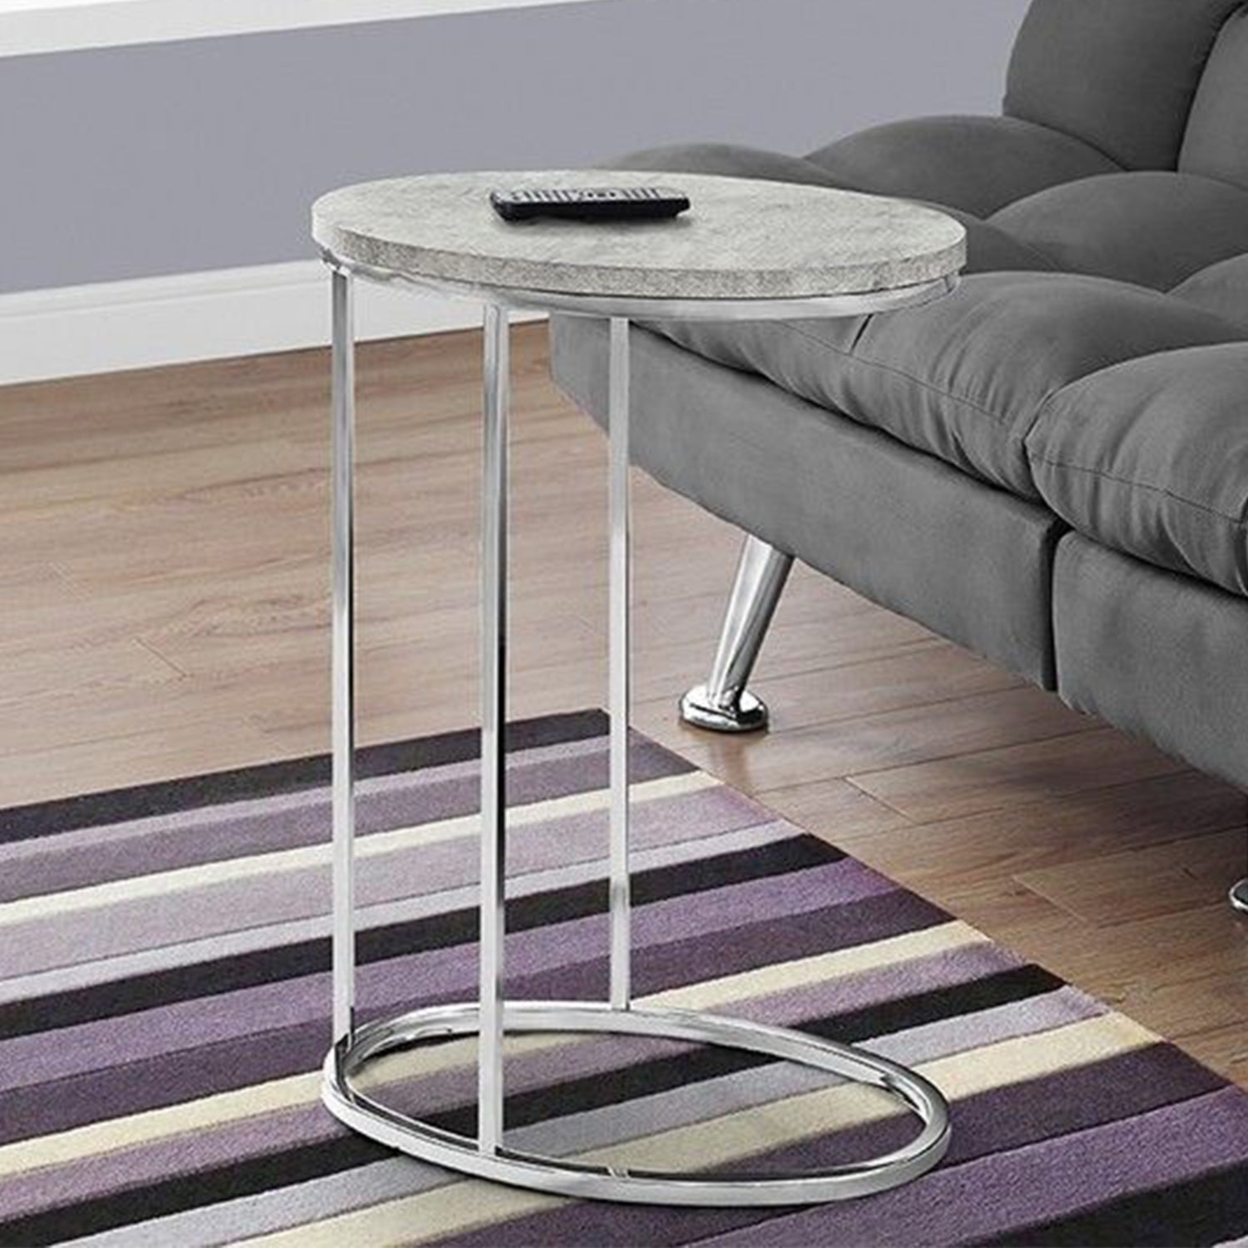 18.5" x 12" x 25" Dark Taupe Particle Board Laminate Metal Accent Table - Grey